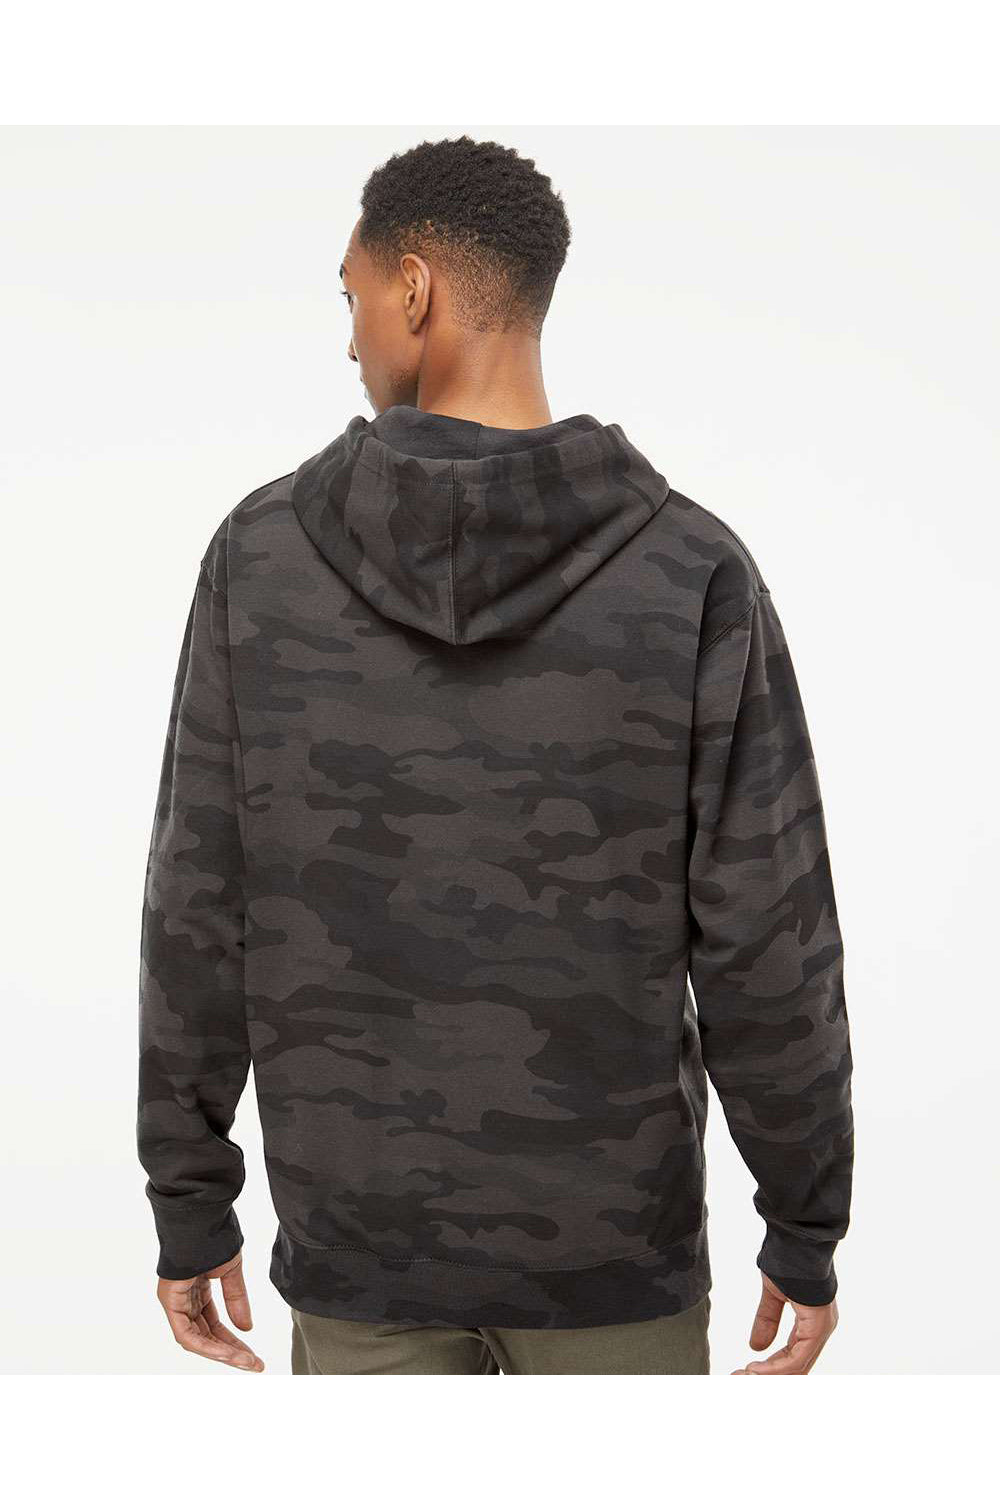 Independent Trading Co. SS4500 Mens Hooded Sweatshirt Hoodie Black Camo Model Back